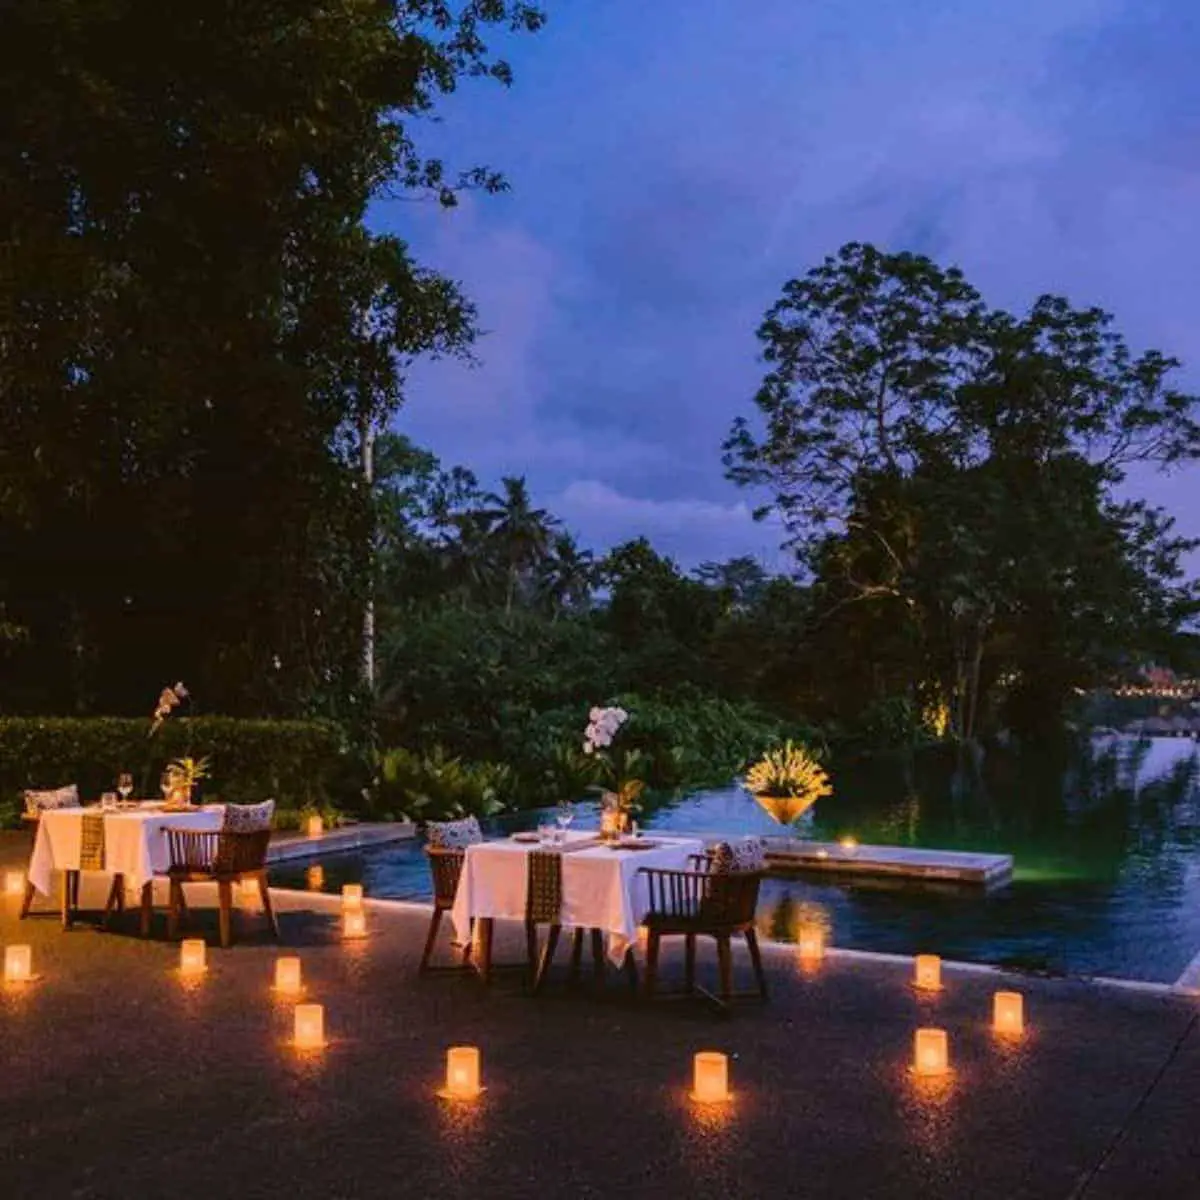 The romantic setting of two dining tables with candle lighting in the poolside of Alila